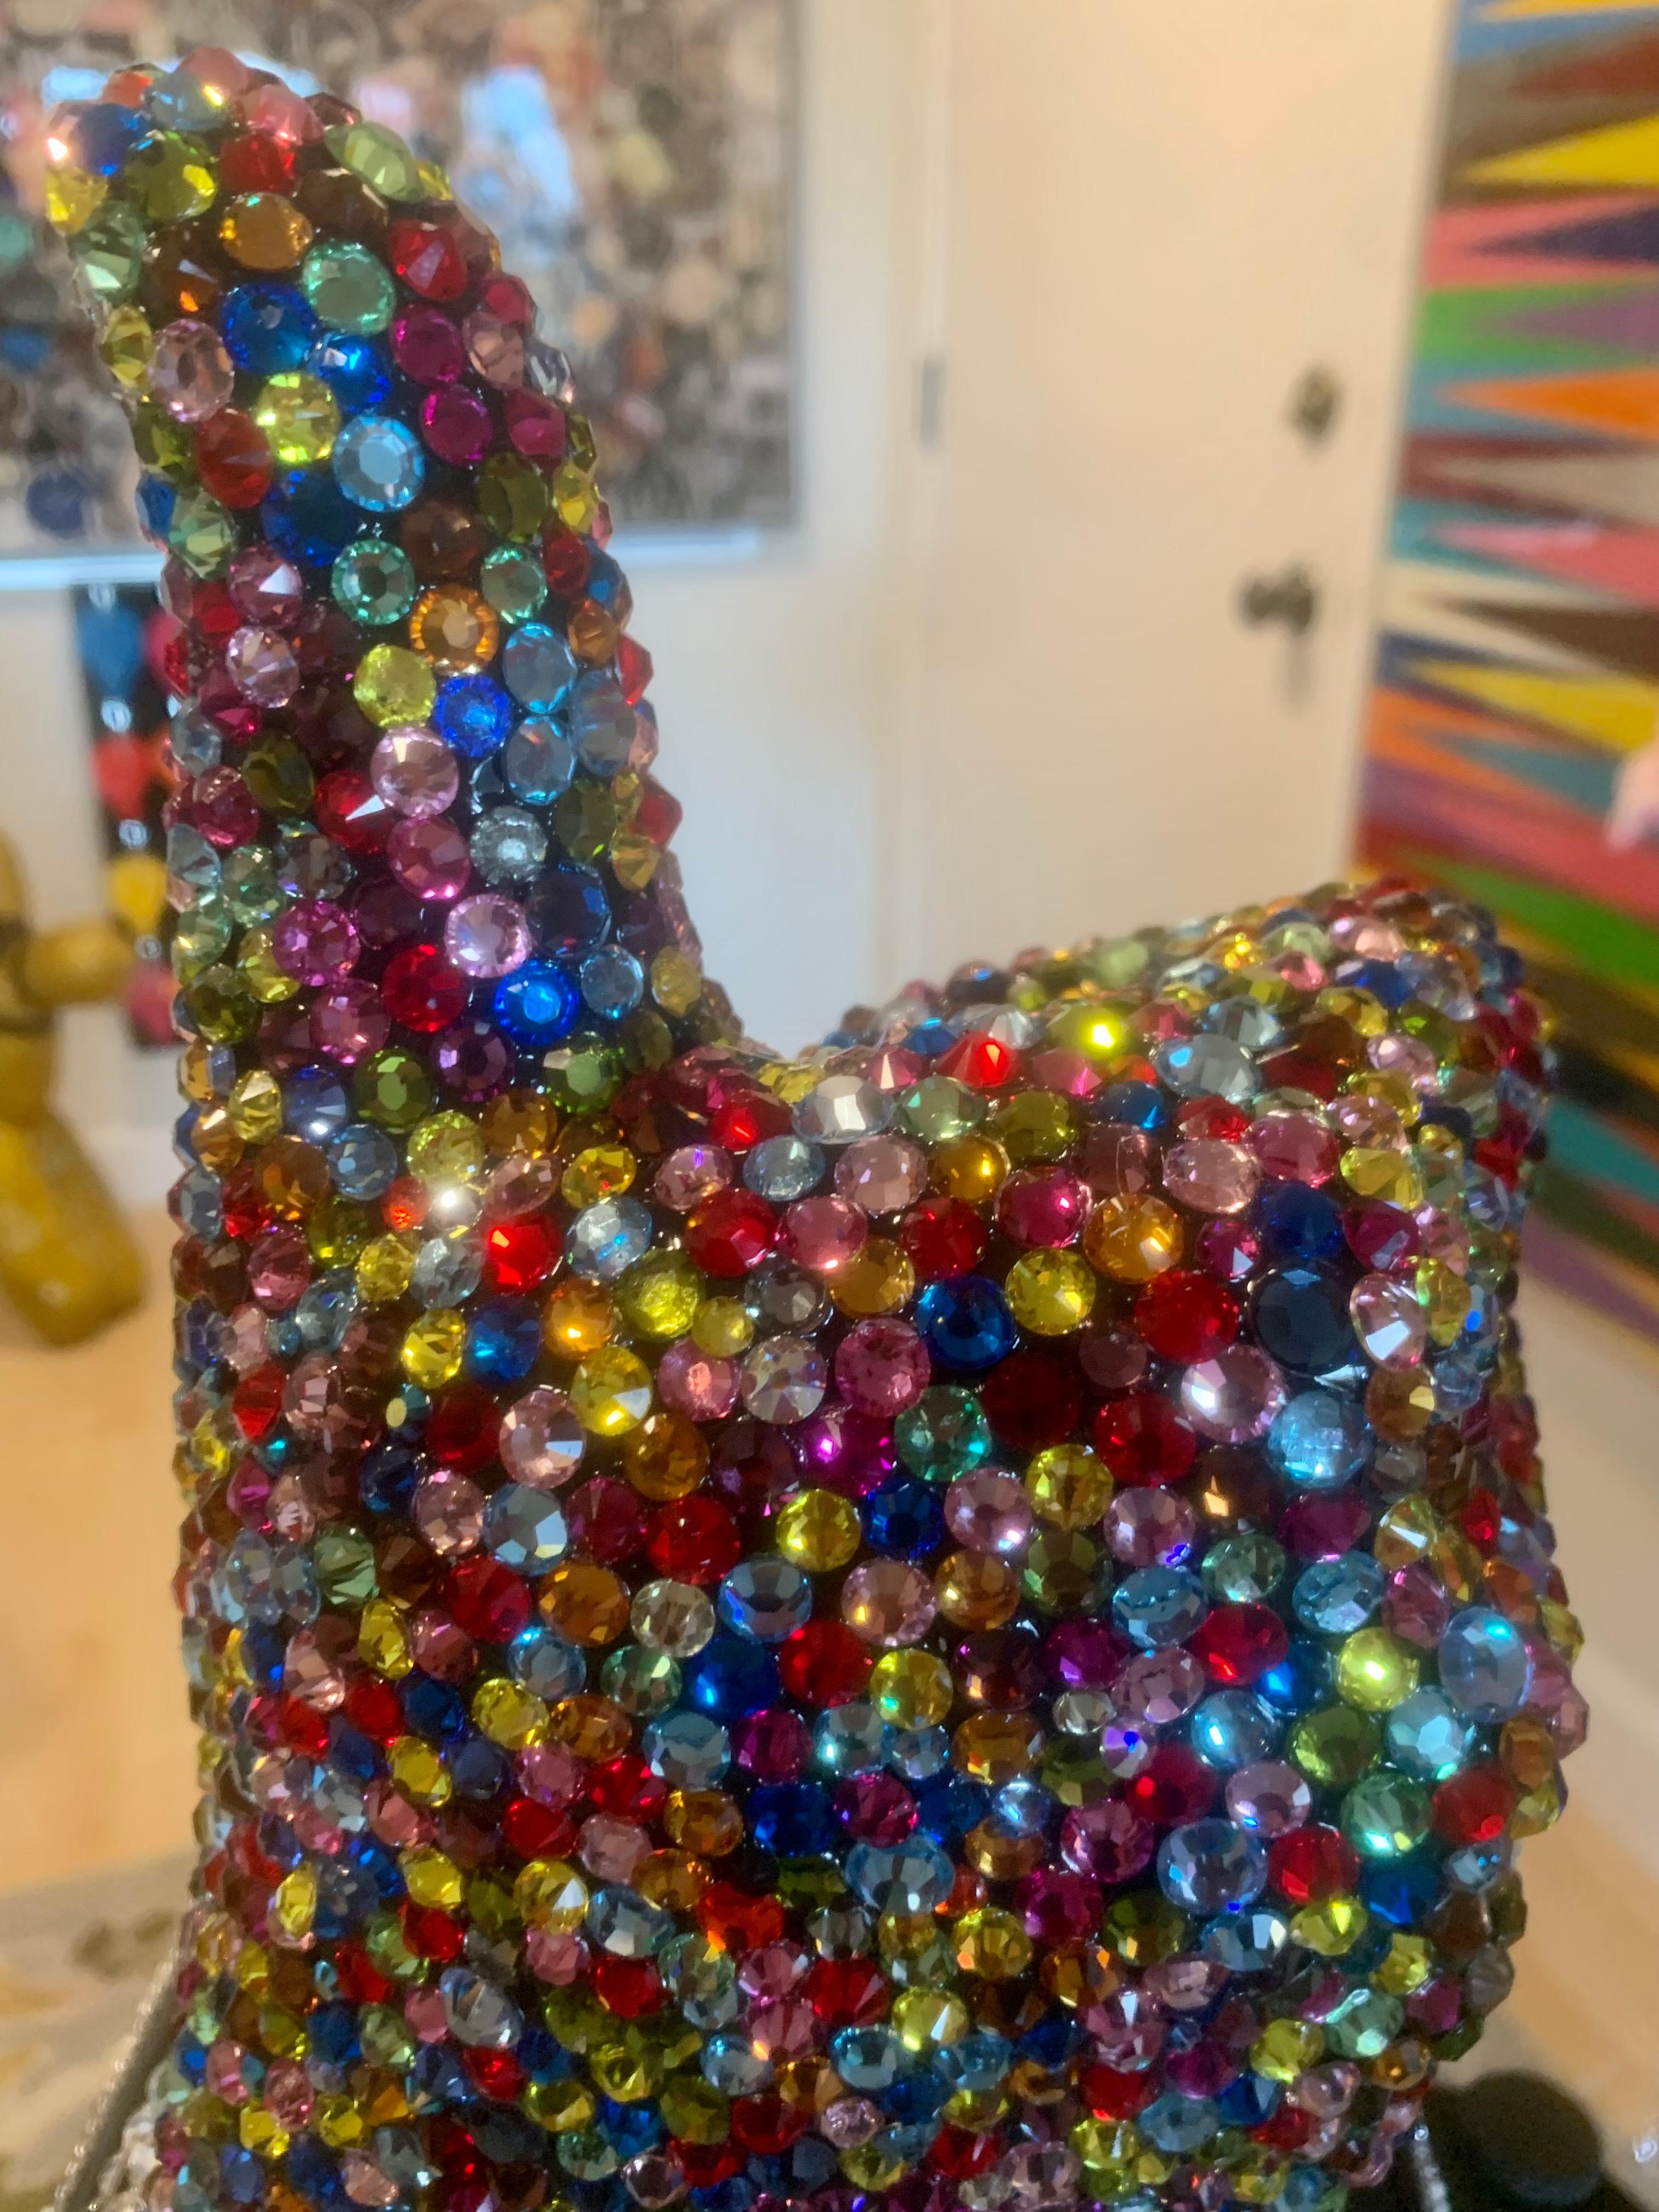 THUMBS UP FOR LIFE (One of a Kind Swarovski Mixed Media Sculpture) 5